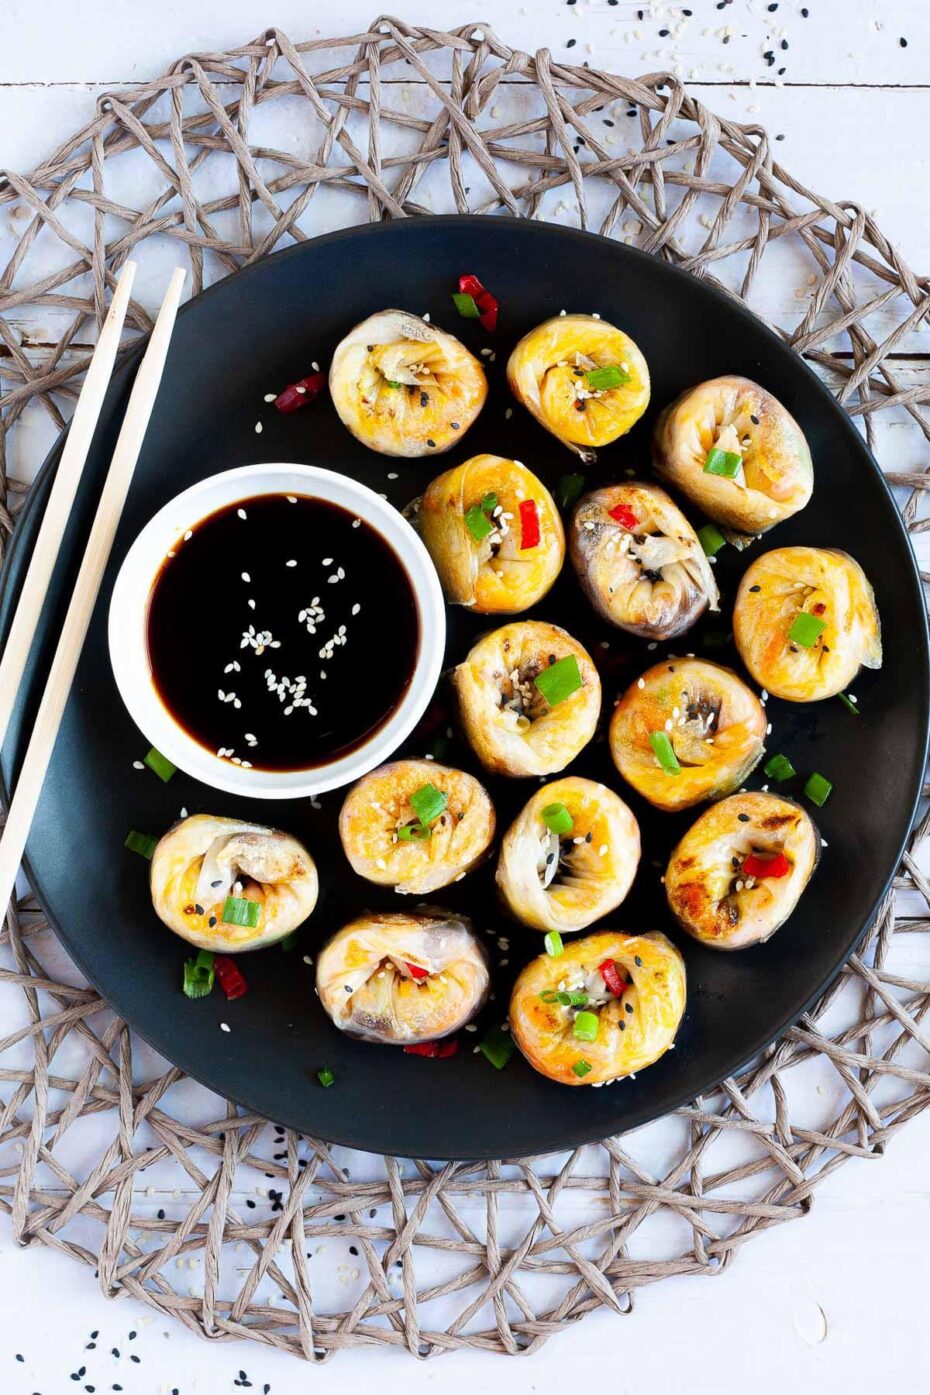 Lots of round-shaped rice paper dumplings arranged in a semi-circular dish facing upwards sprinkled with sesame seeds, chopped spring onion and red hot pepper around a brown dipping sauce. Wooden chopsticks are on the side.